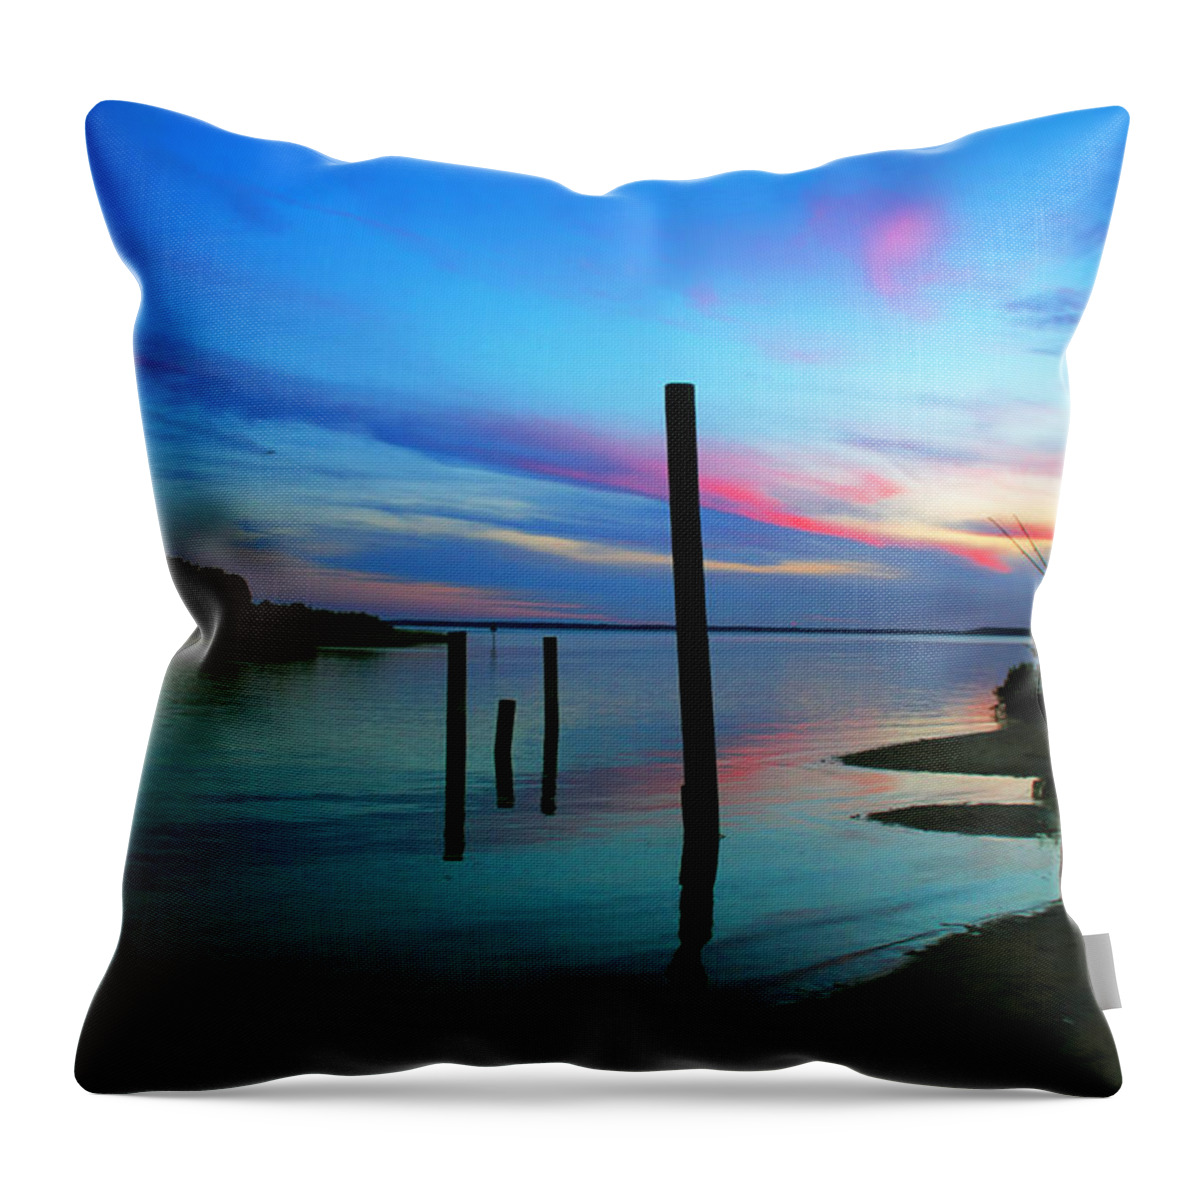 Pillars Of Time Throw Pillow featuring the photograph Pillars of Time by Ola Allen